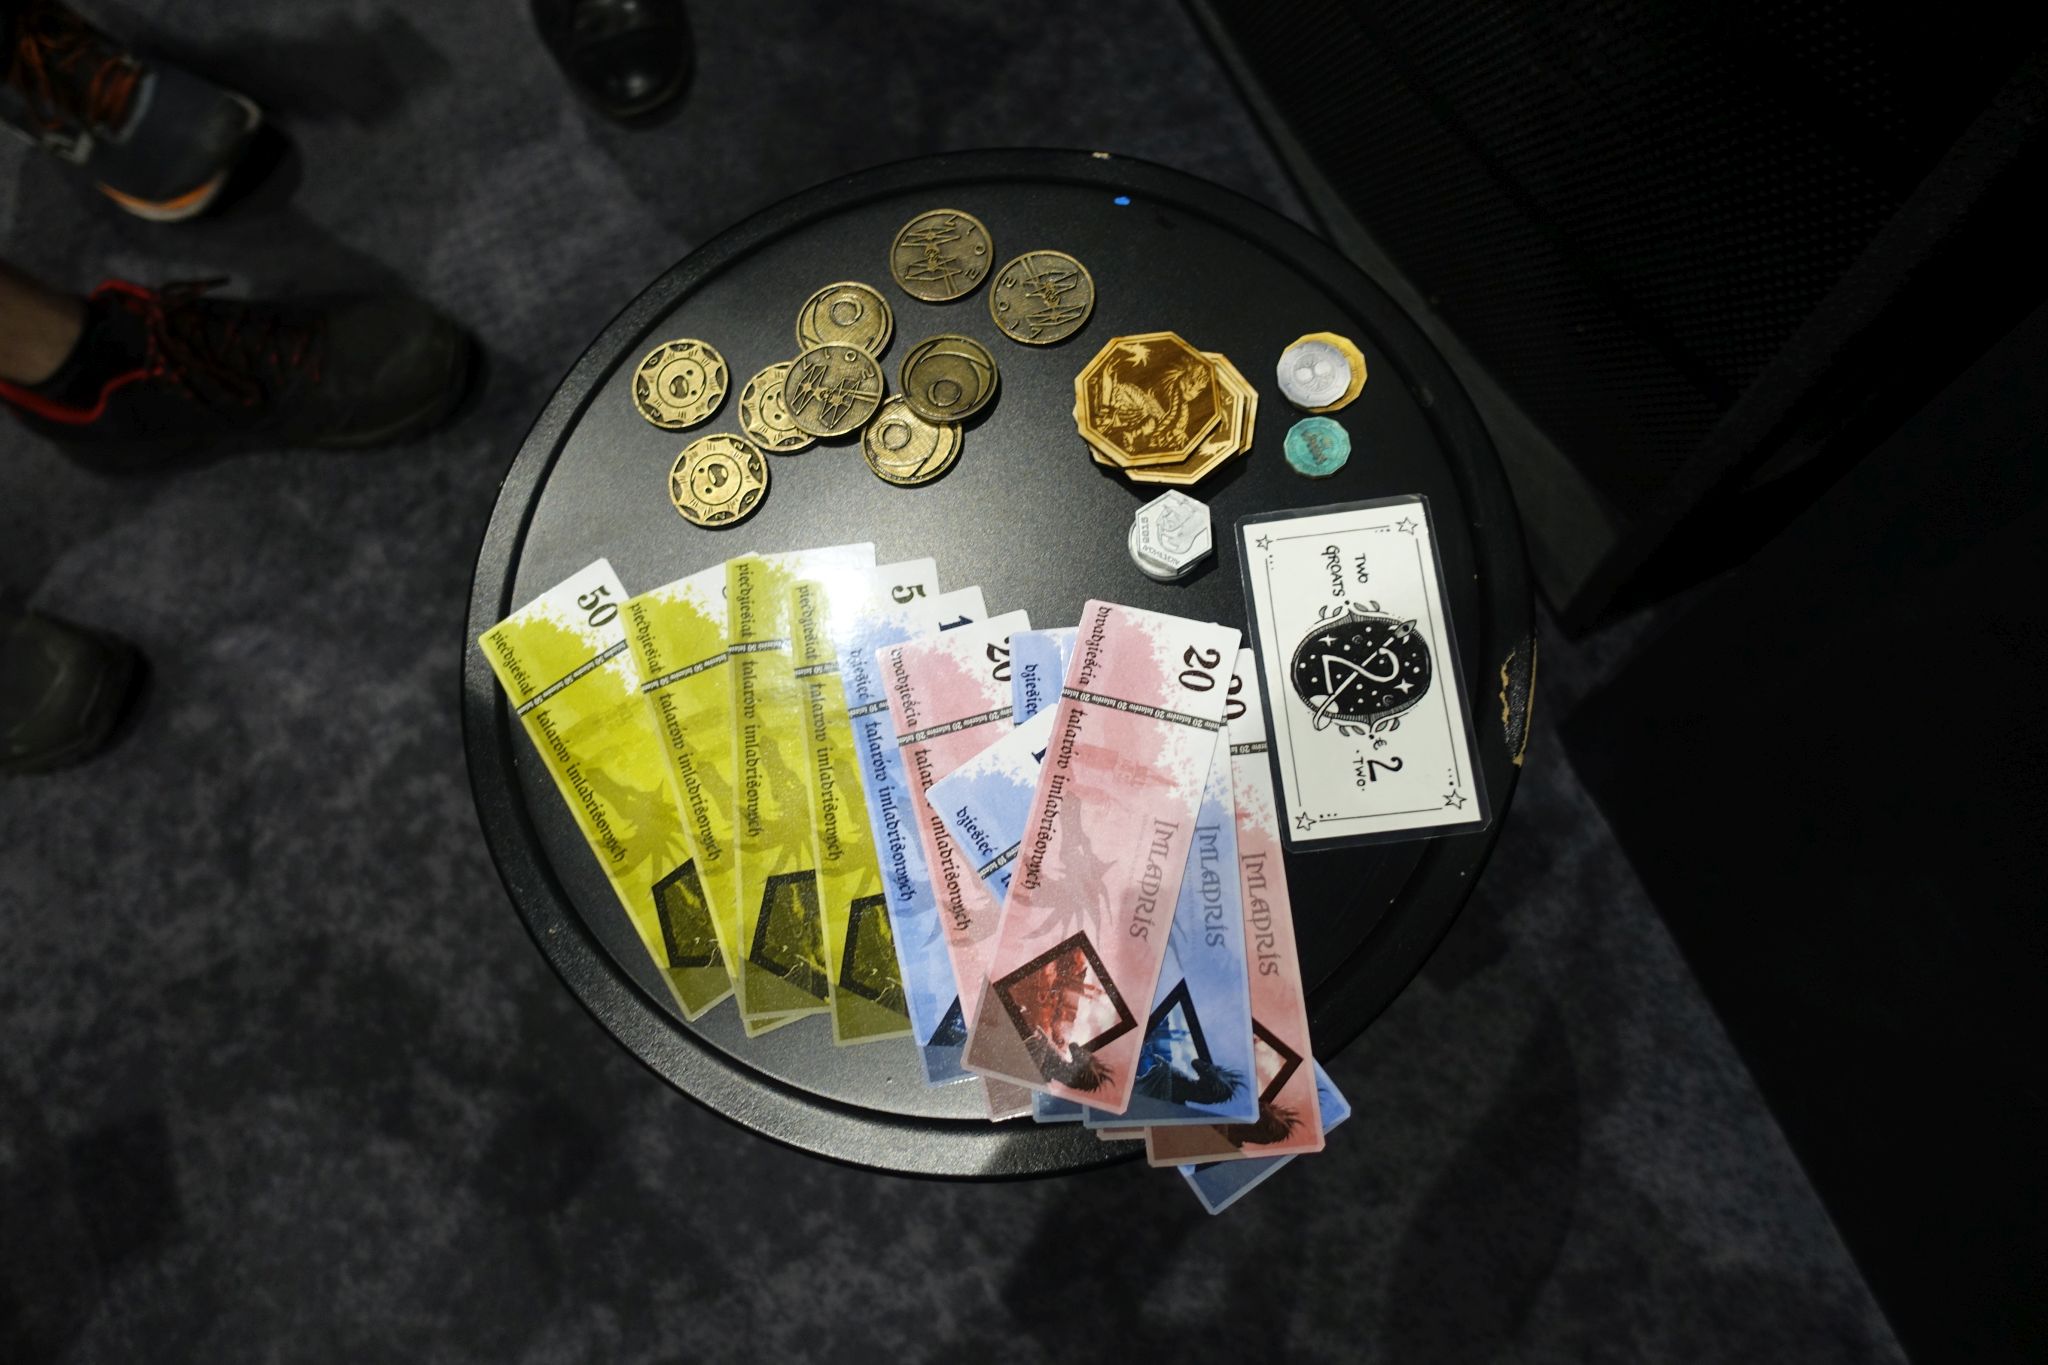 Picture shows multiple kinds of 'currency' on a stool. There are coins (metal and carton ones) and notes.